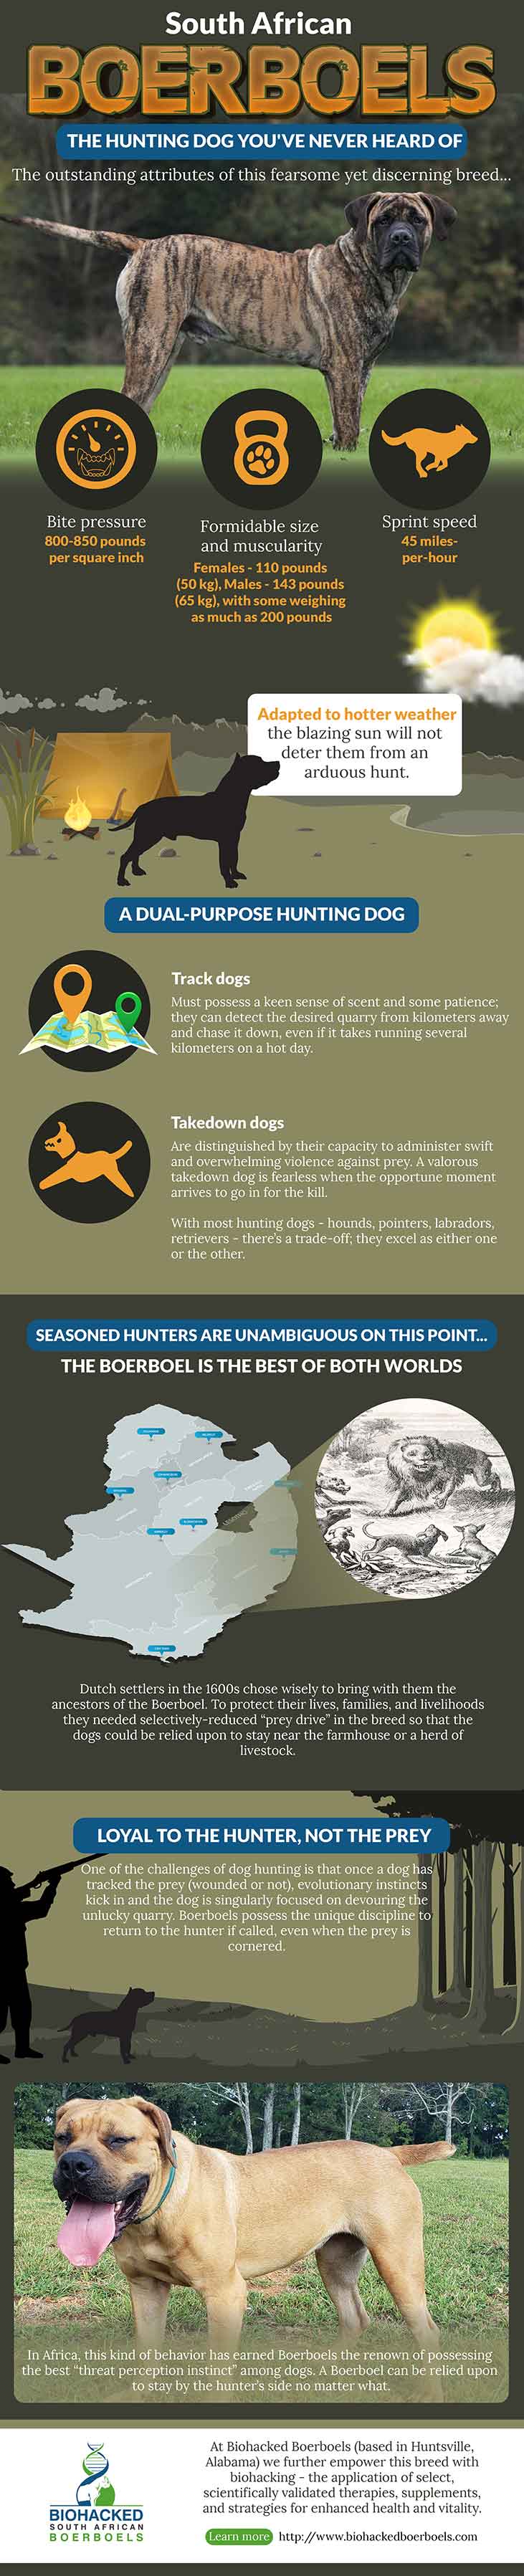 South African Boerboels infographic